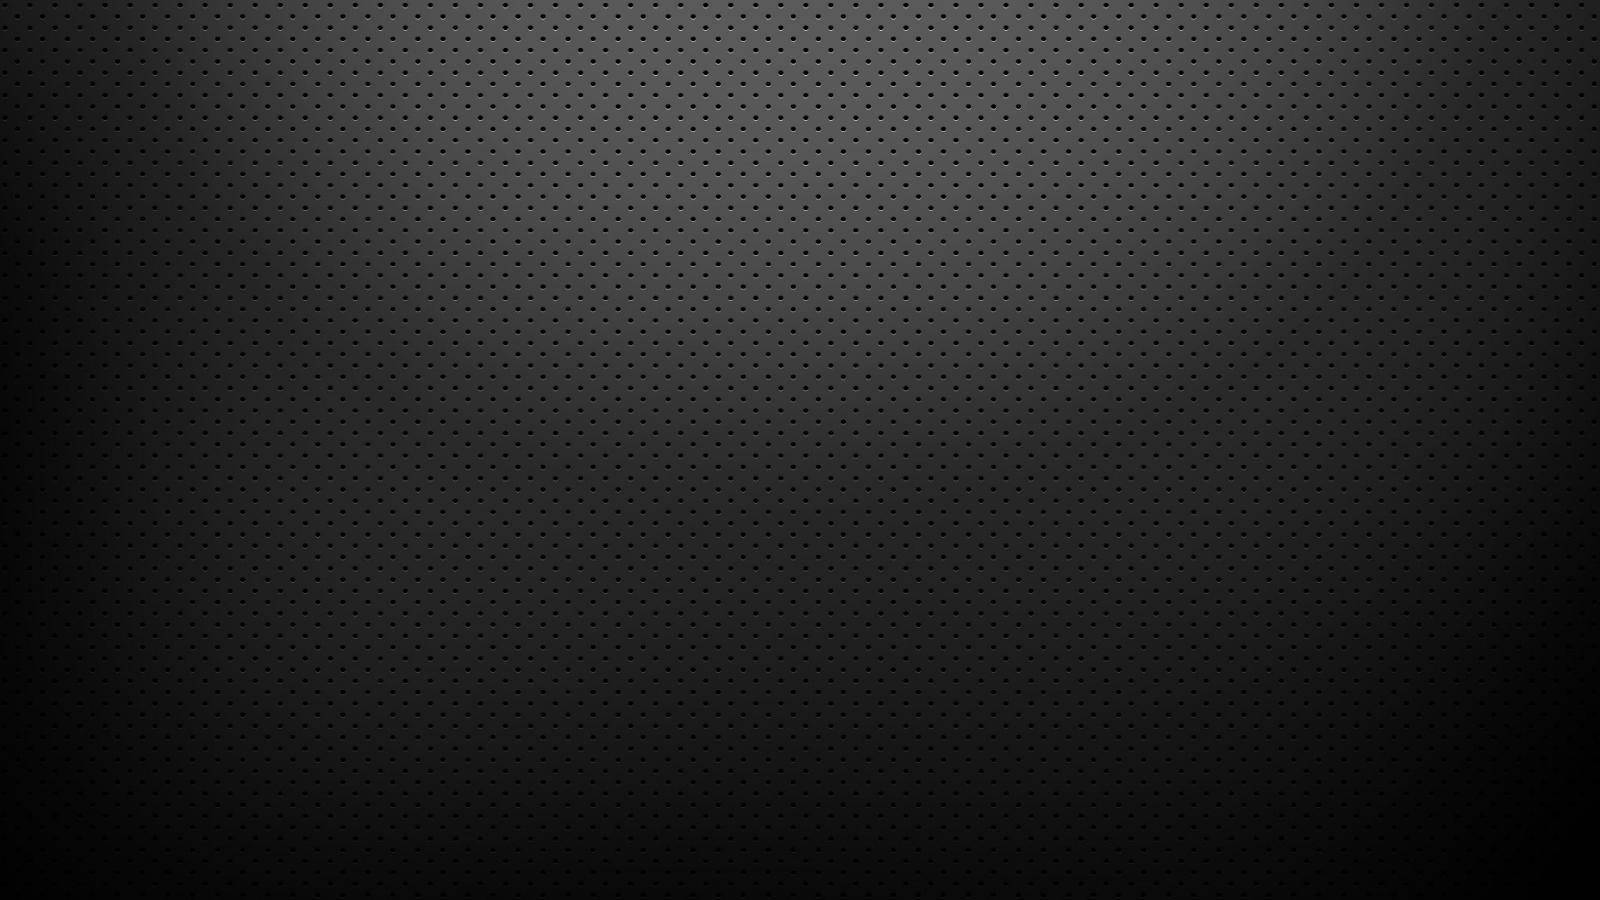 Plain Black With Small Holes Background